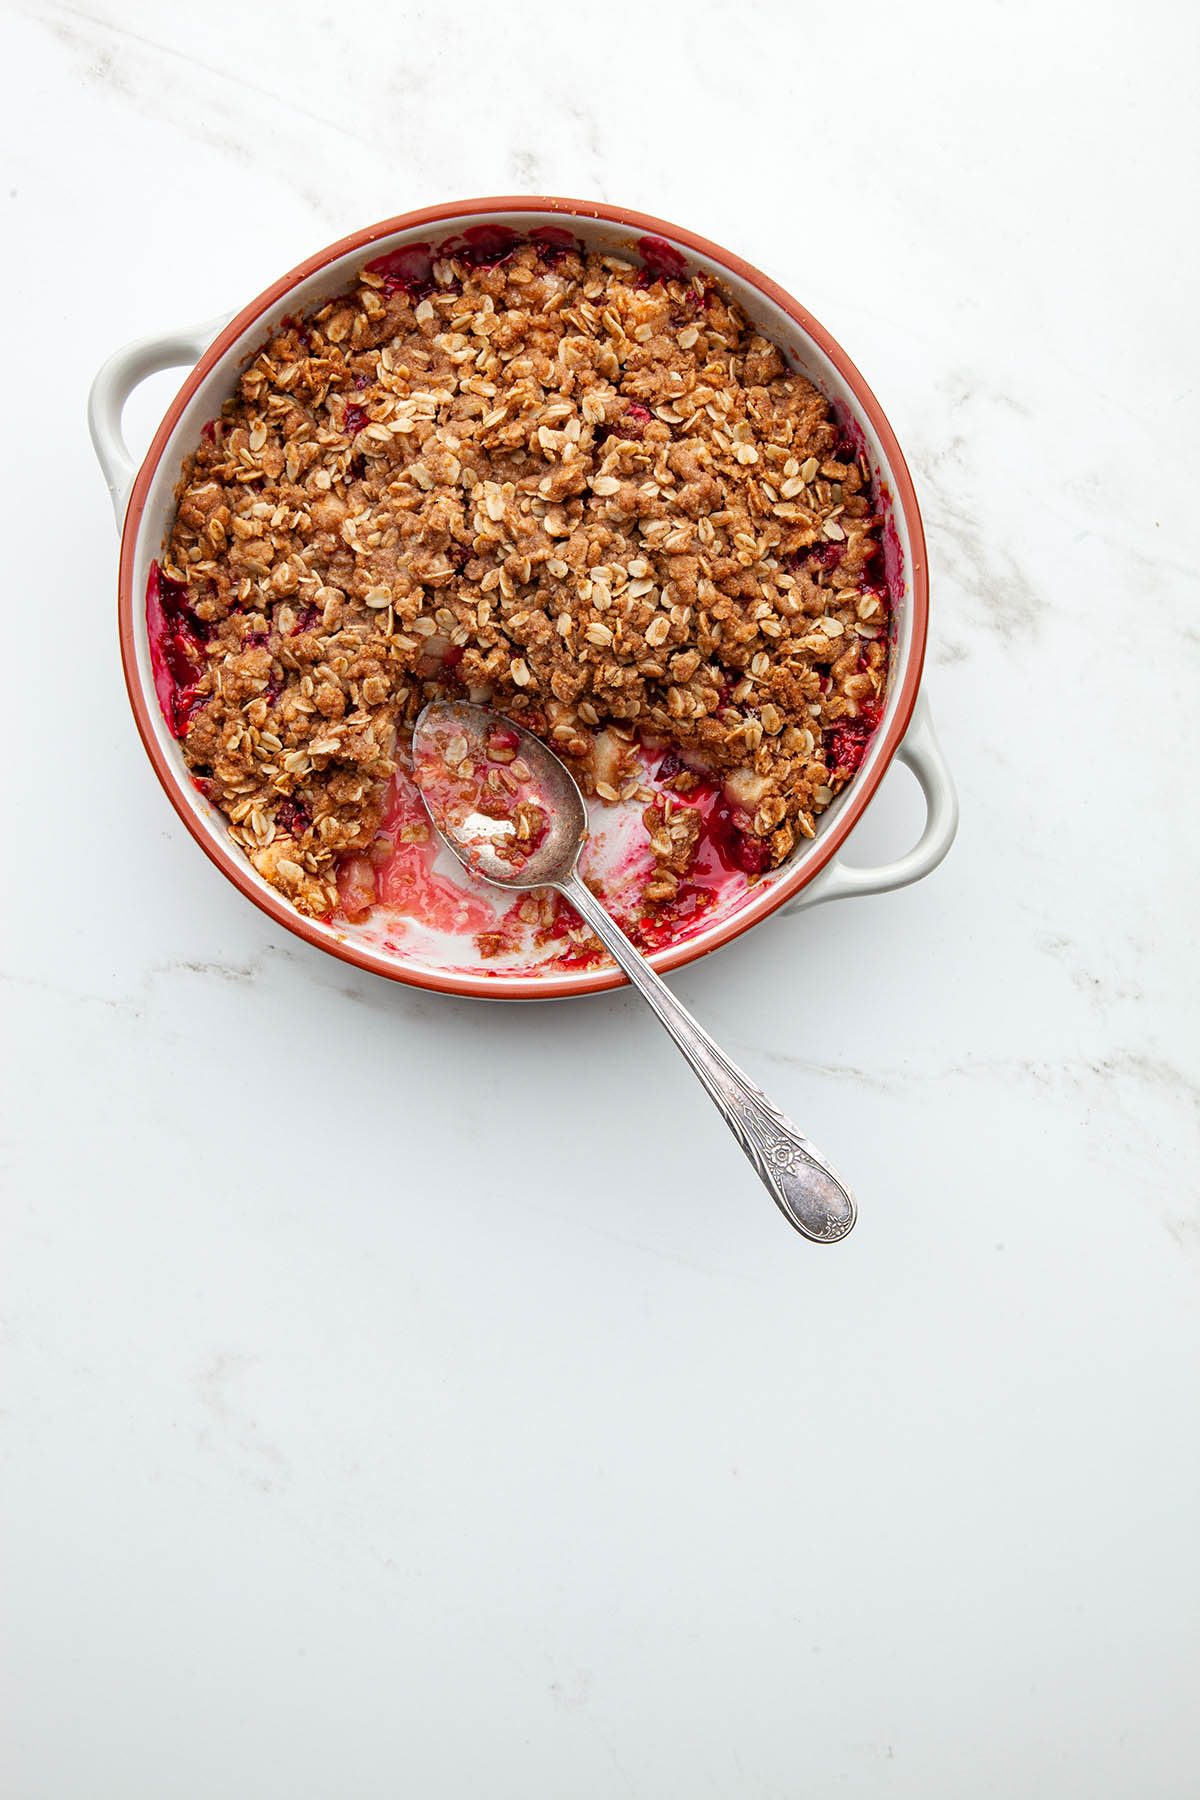 A pan of baked fruit with oat topping with one portion removed and a spoon in the pan on a marble surface.